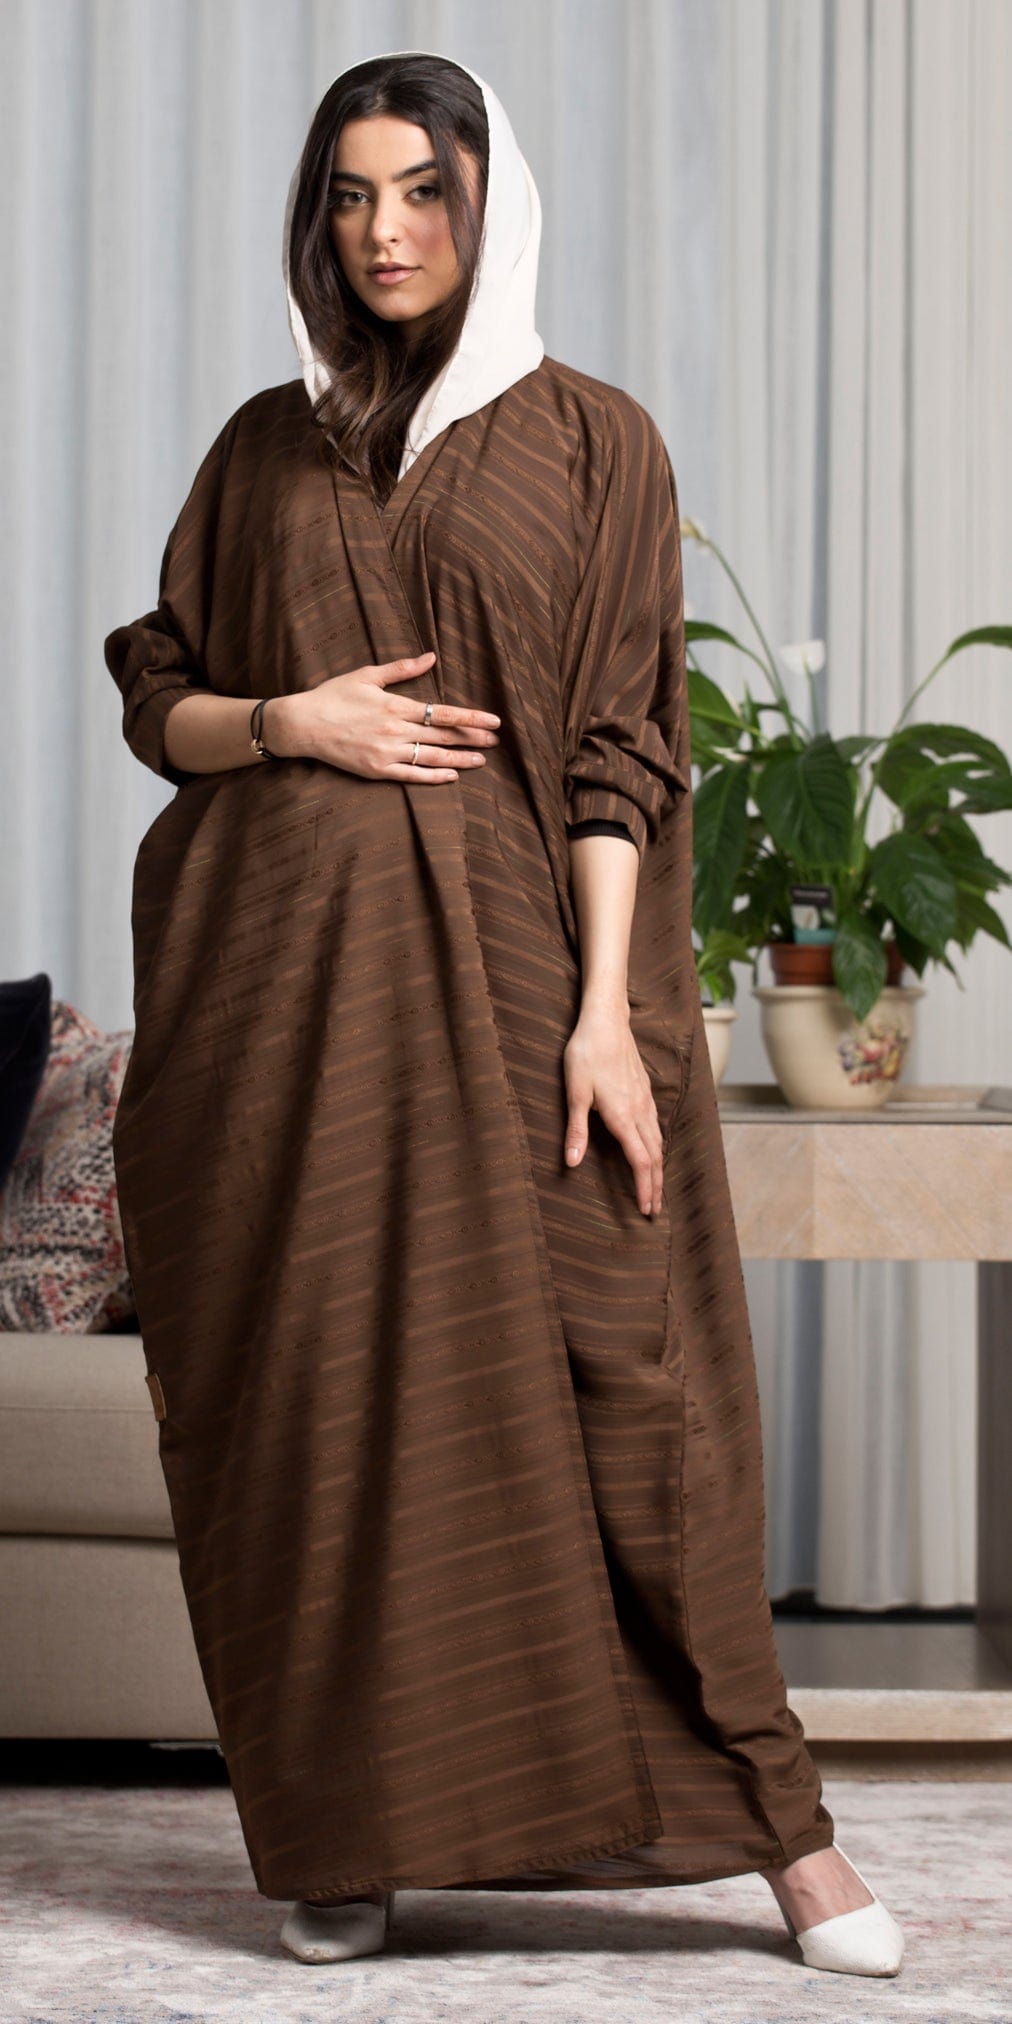 CL-0201 Abaya, wide model, light brown striped fabric